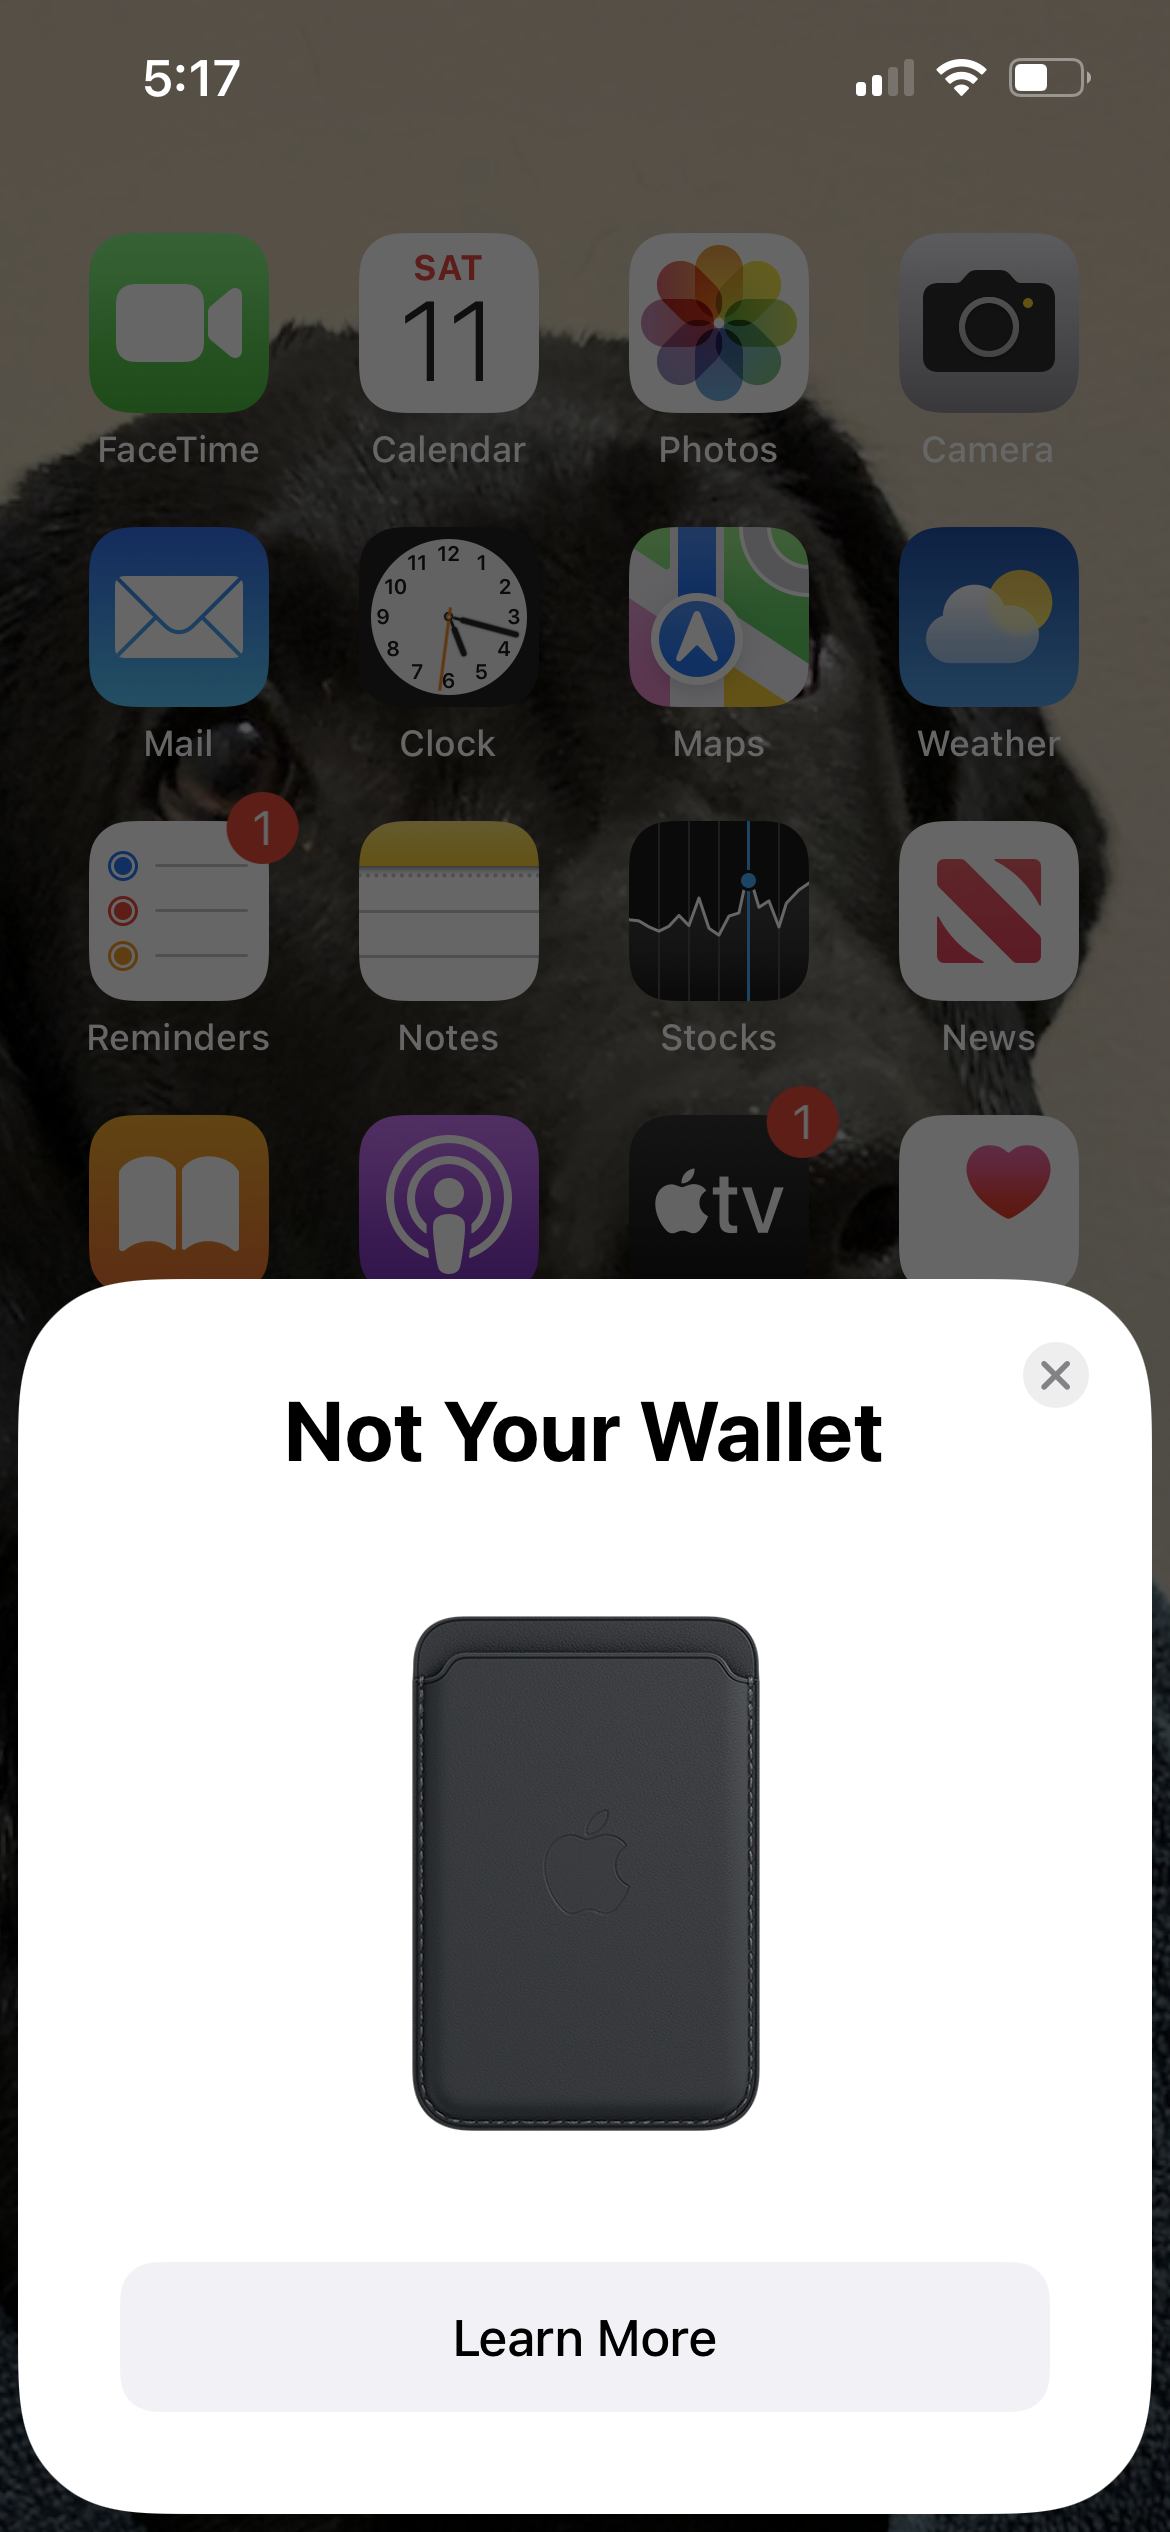 Can’t find Wallet app icon - Apple Community